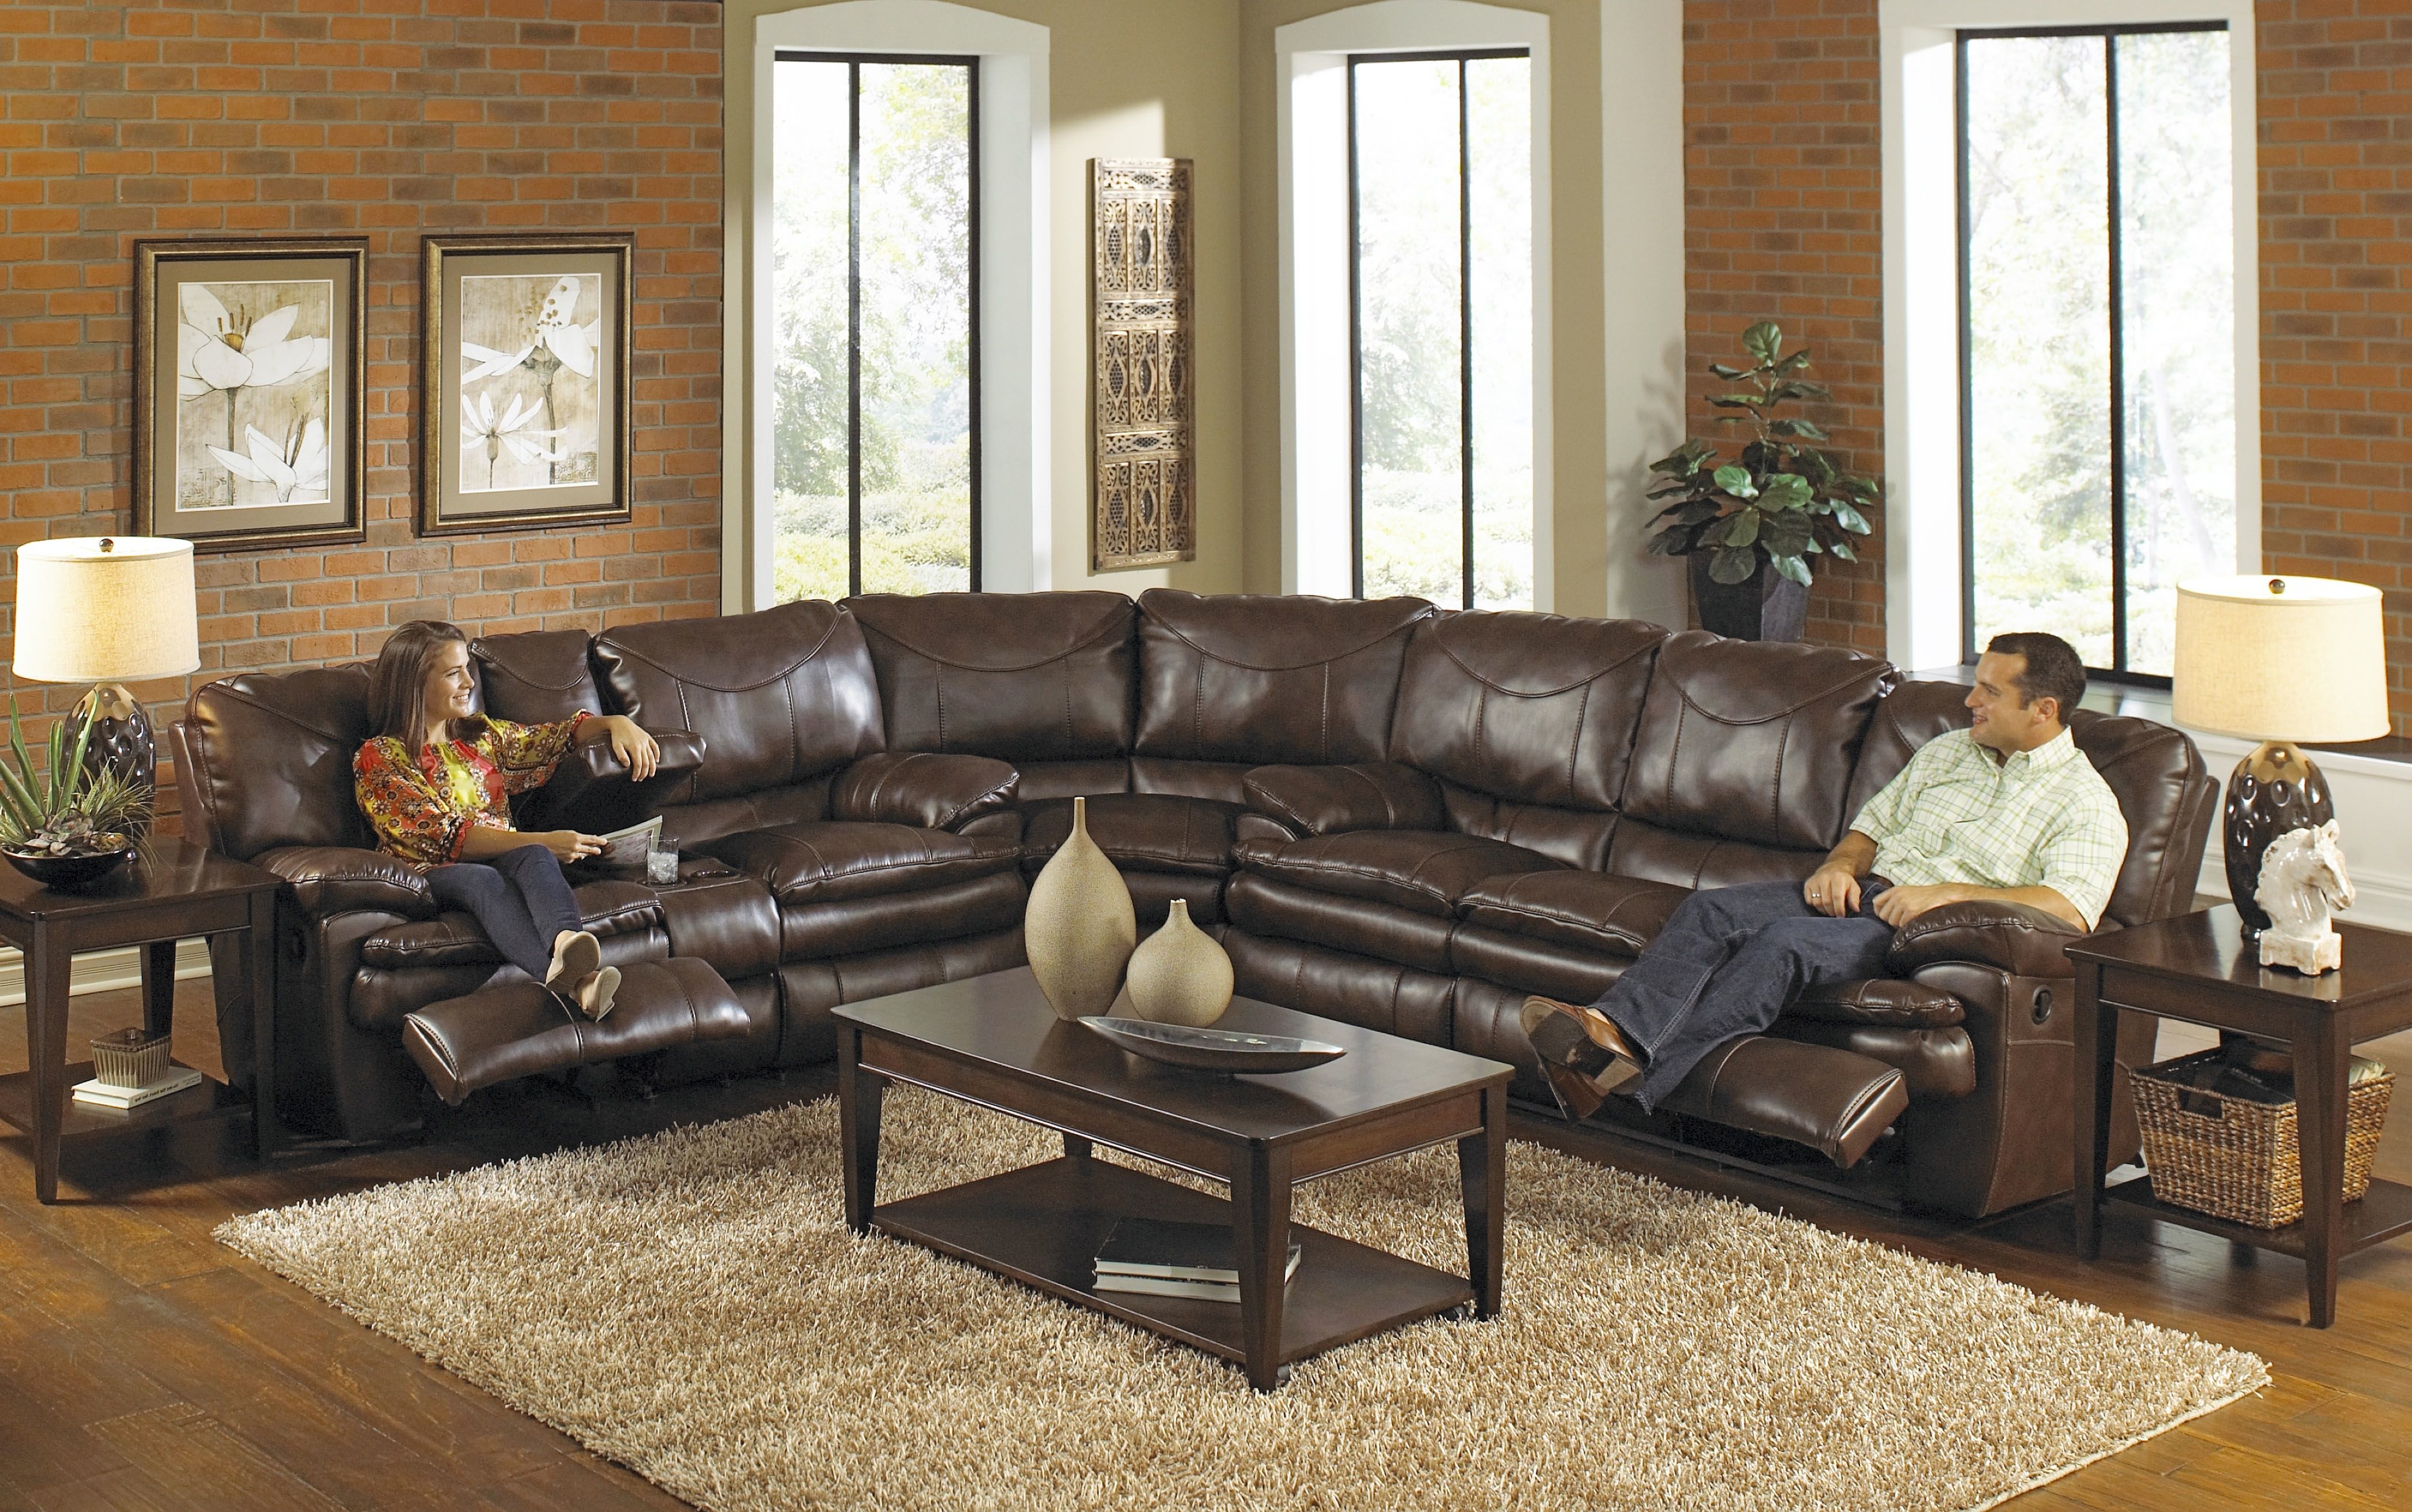 High Quality Leather Sectional Sofas – Radiovannes Within Well Known Good Quality Sectional Sofas (View 4 of 15)